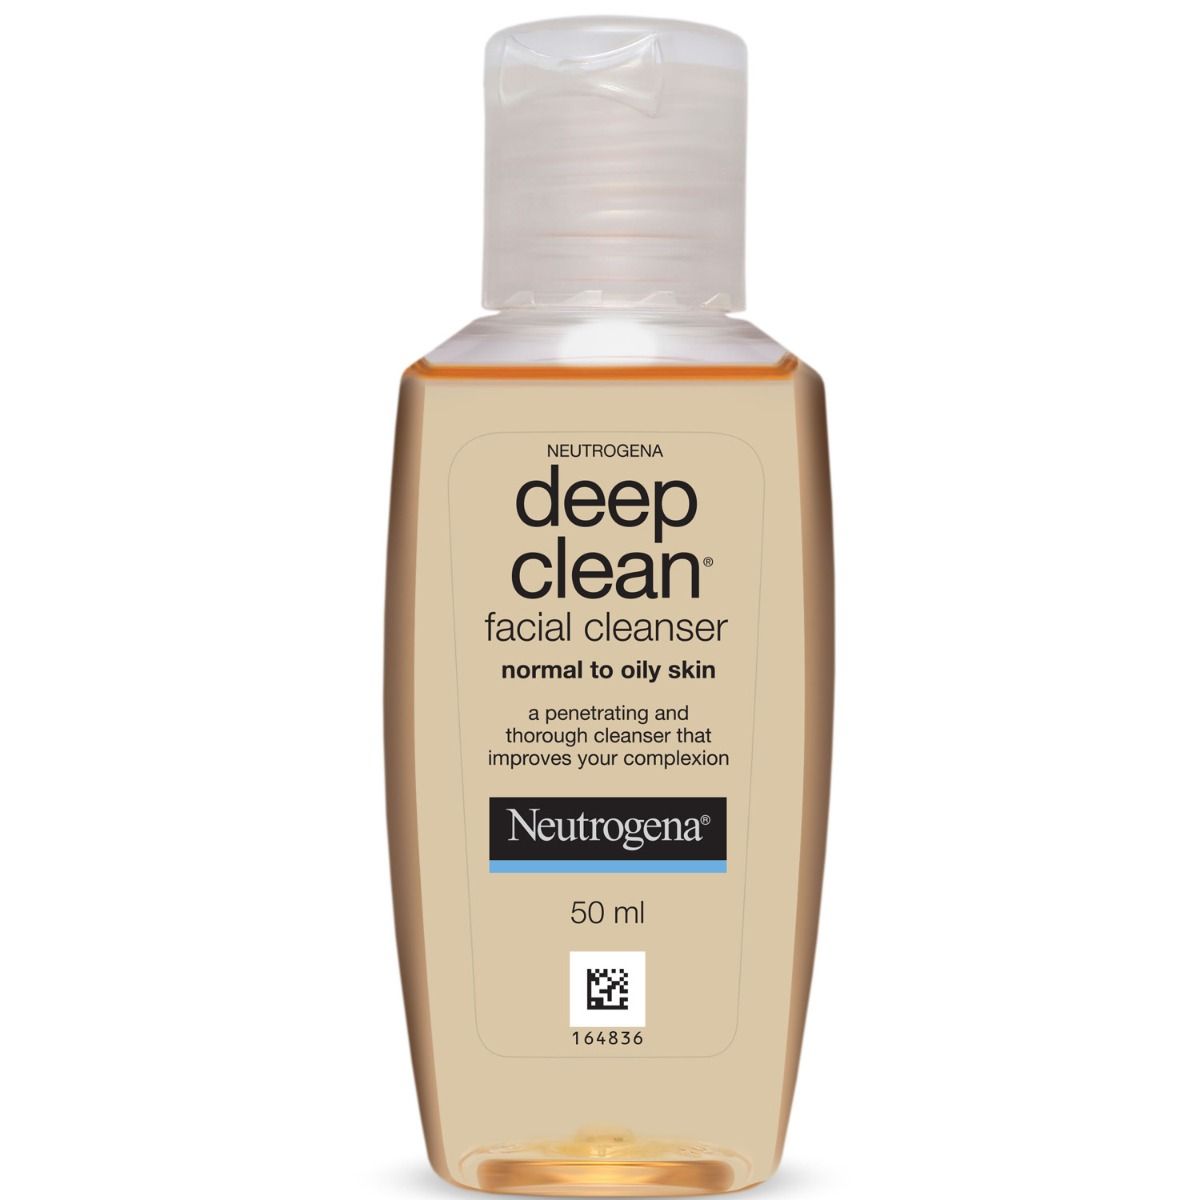 Neutrogena Deep Clean Facial Cleanser For Normal to Oily Skin, 50 ml, Pack of 1 